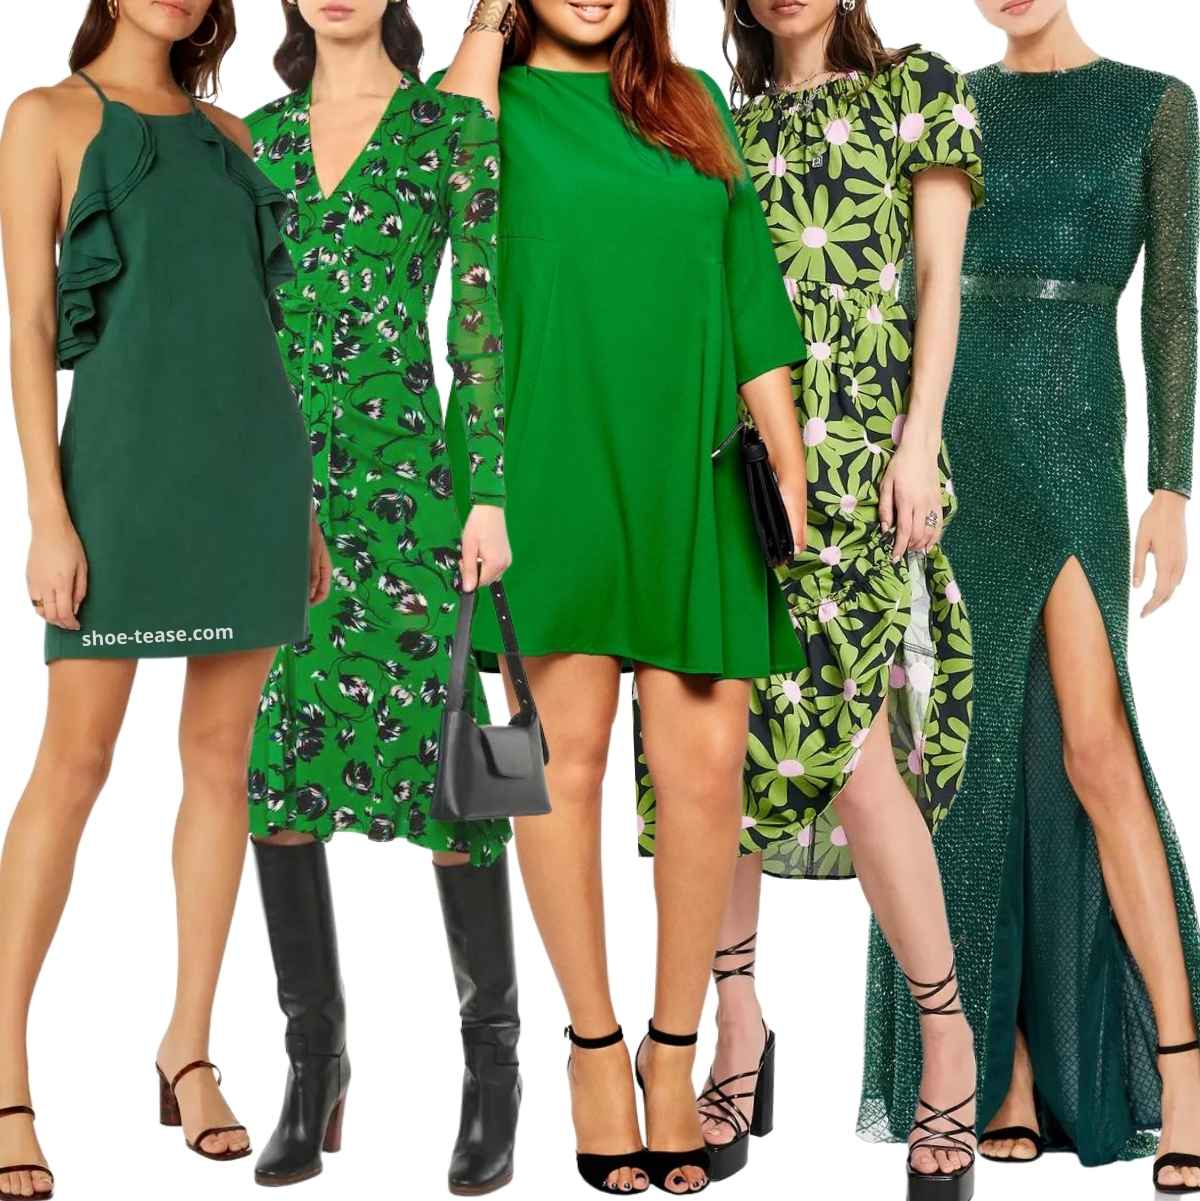 heels for emerald green dress | Exclusive Deals and Offers | jpmgroup.co.in